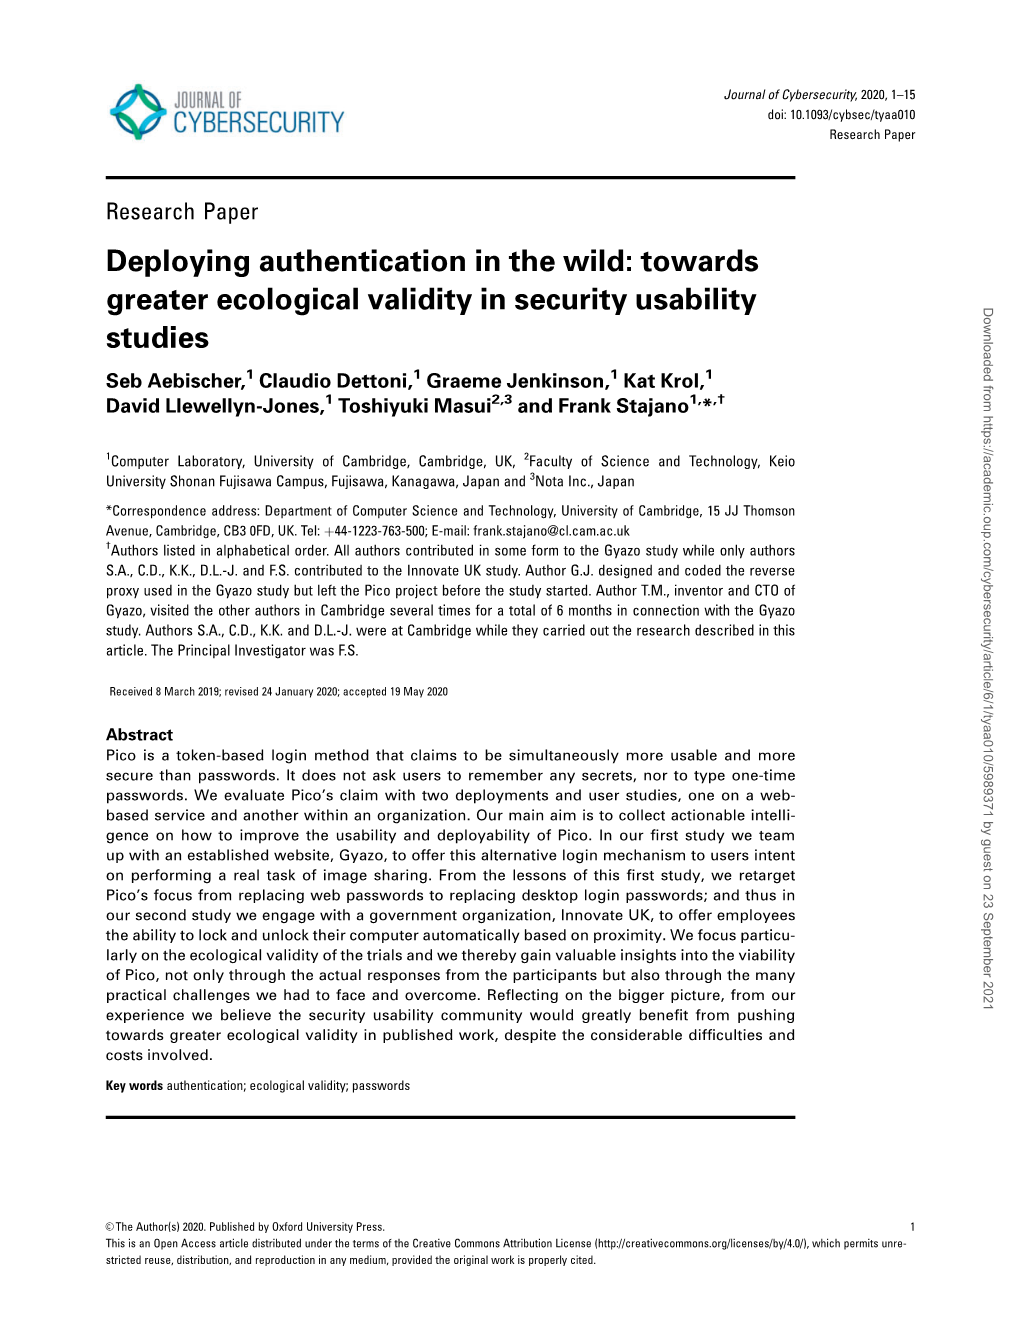 Deploying Authentication in the Wild: Towards Greater Ecological Validity